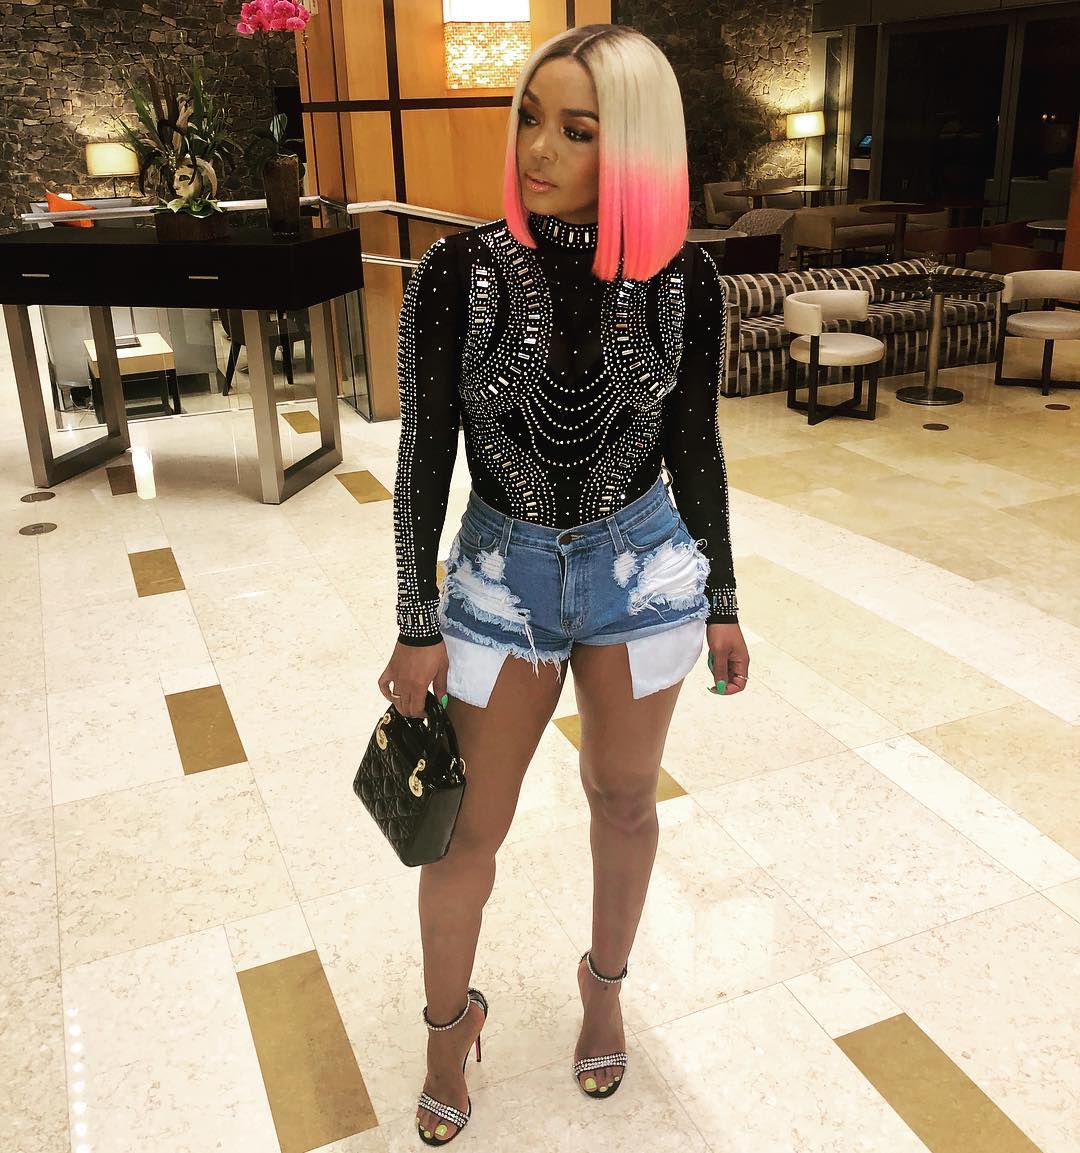 rasheeda-frost-has-great-news-for-fans-and-followers-check-it-out-here